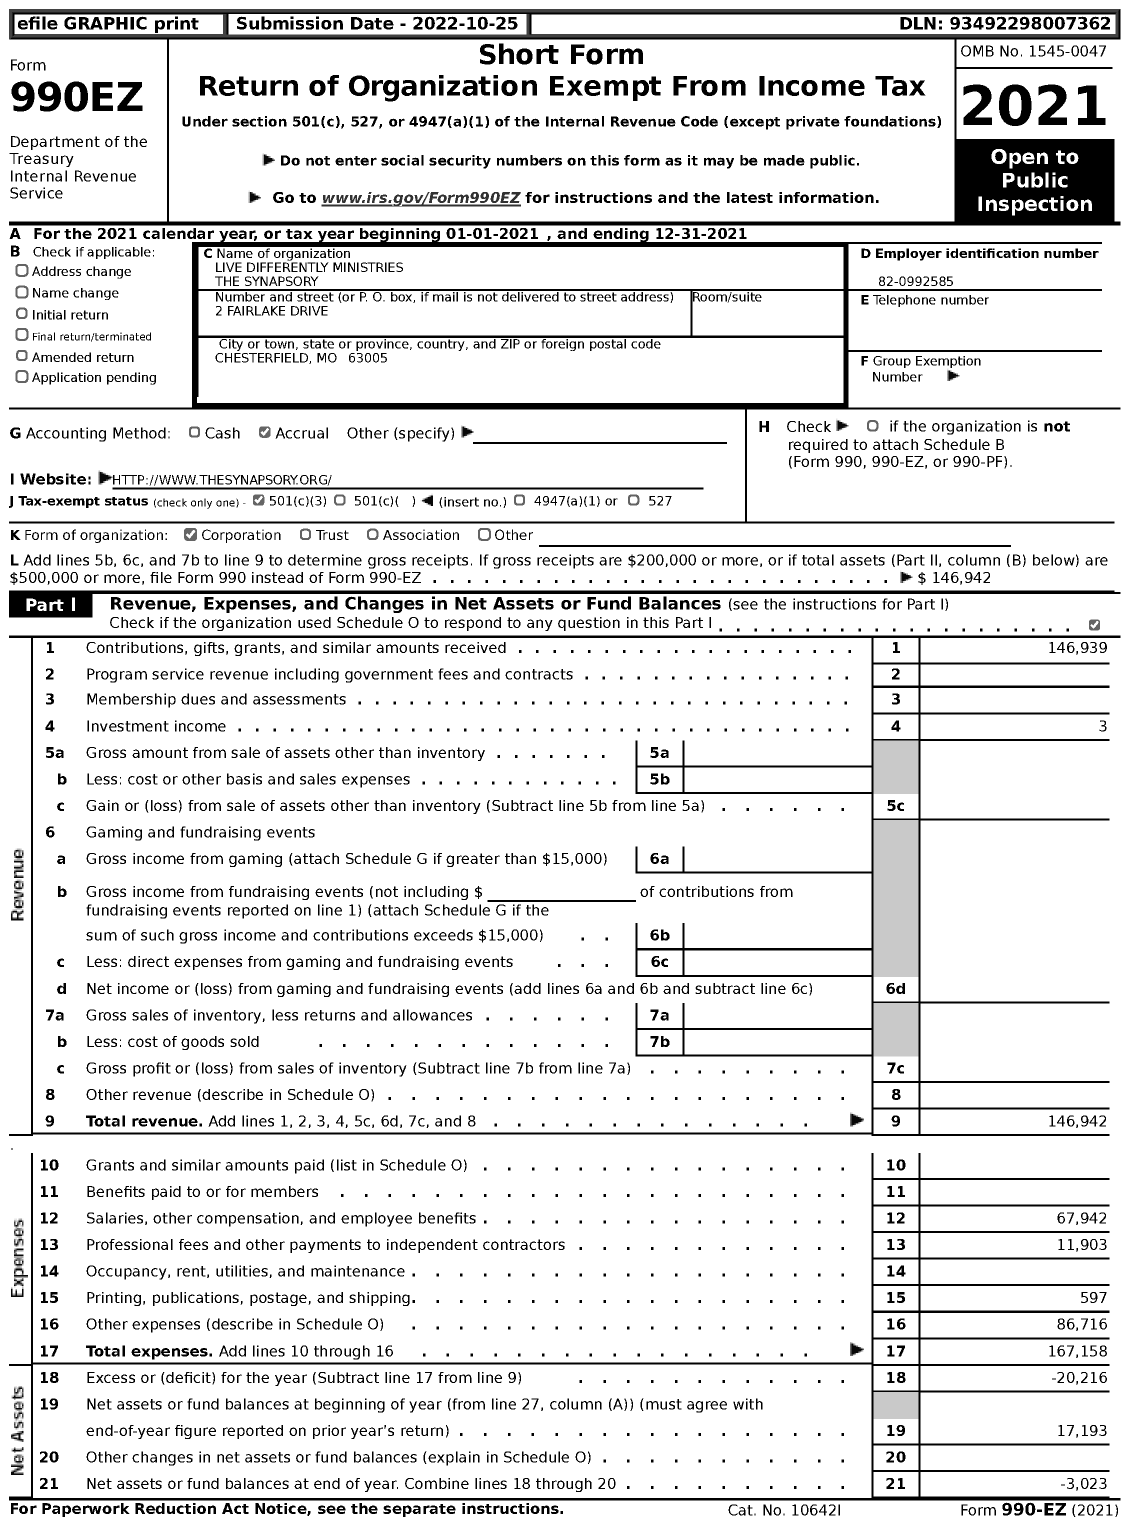 Image of first page of 2021 Form 990EZ for Live Differently Ministries the Synapsory